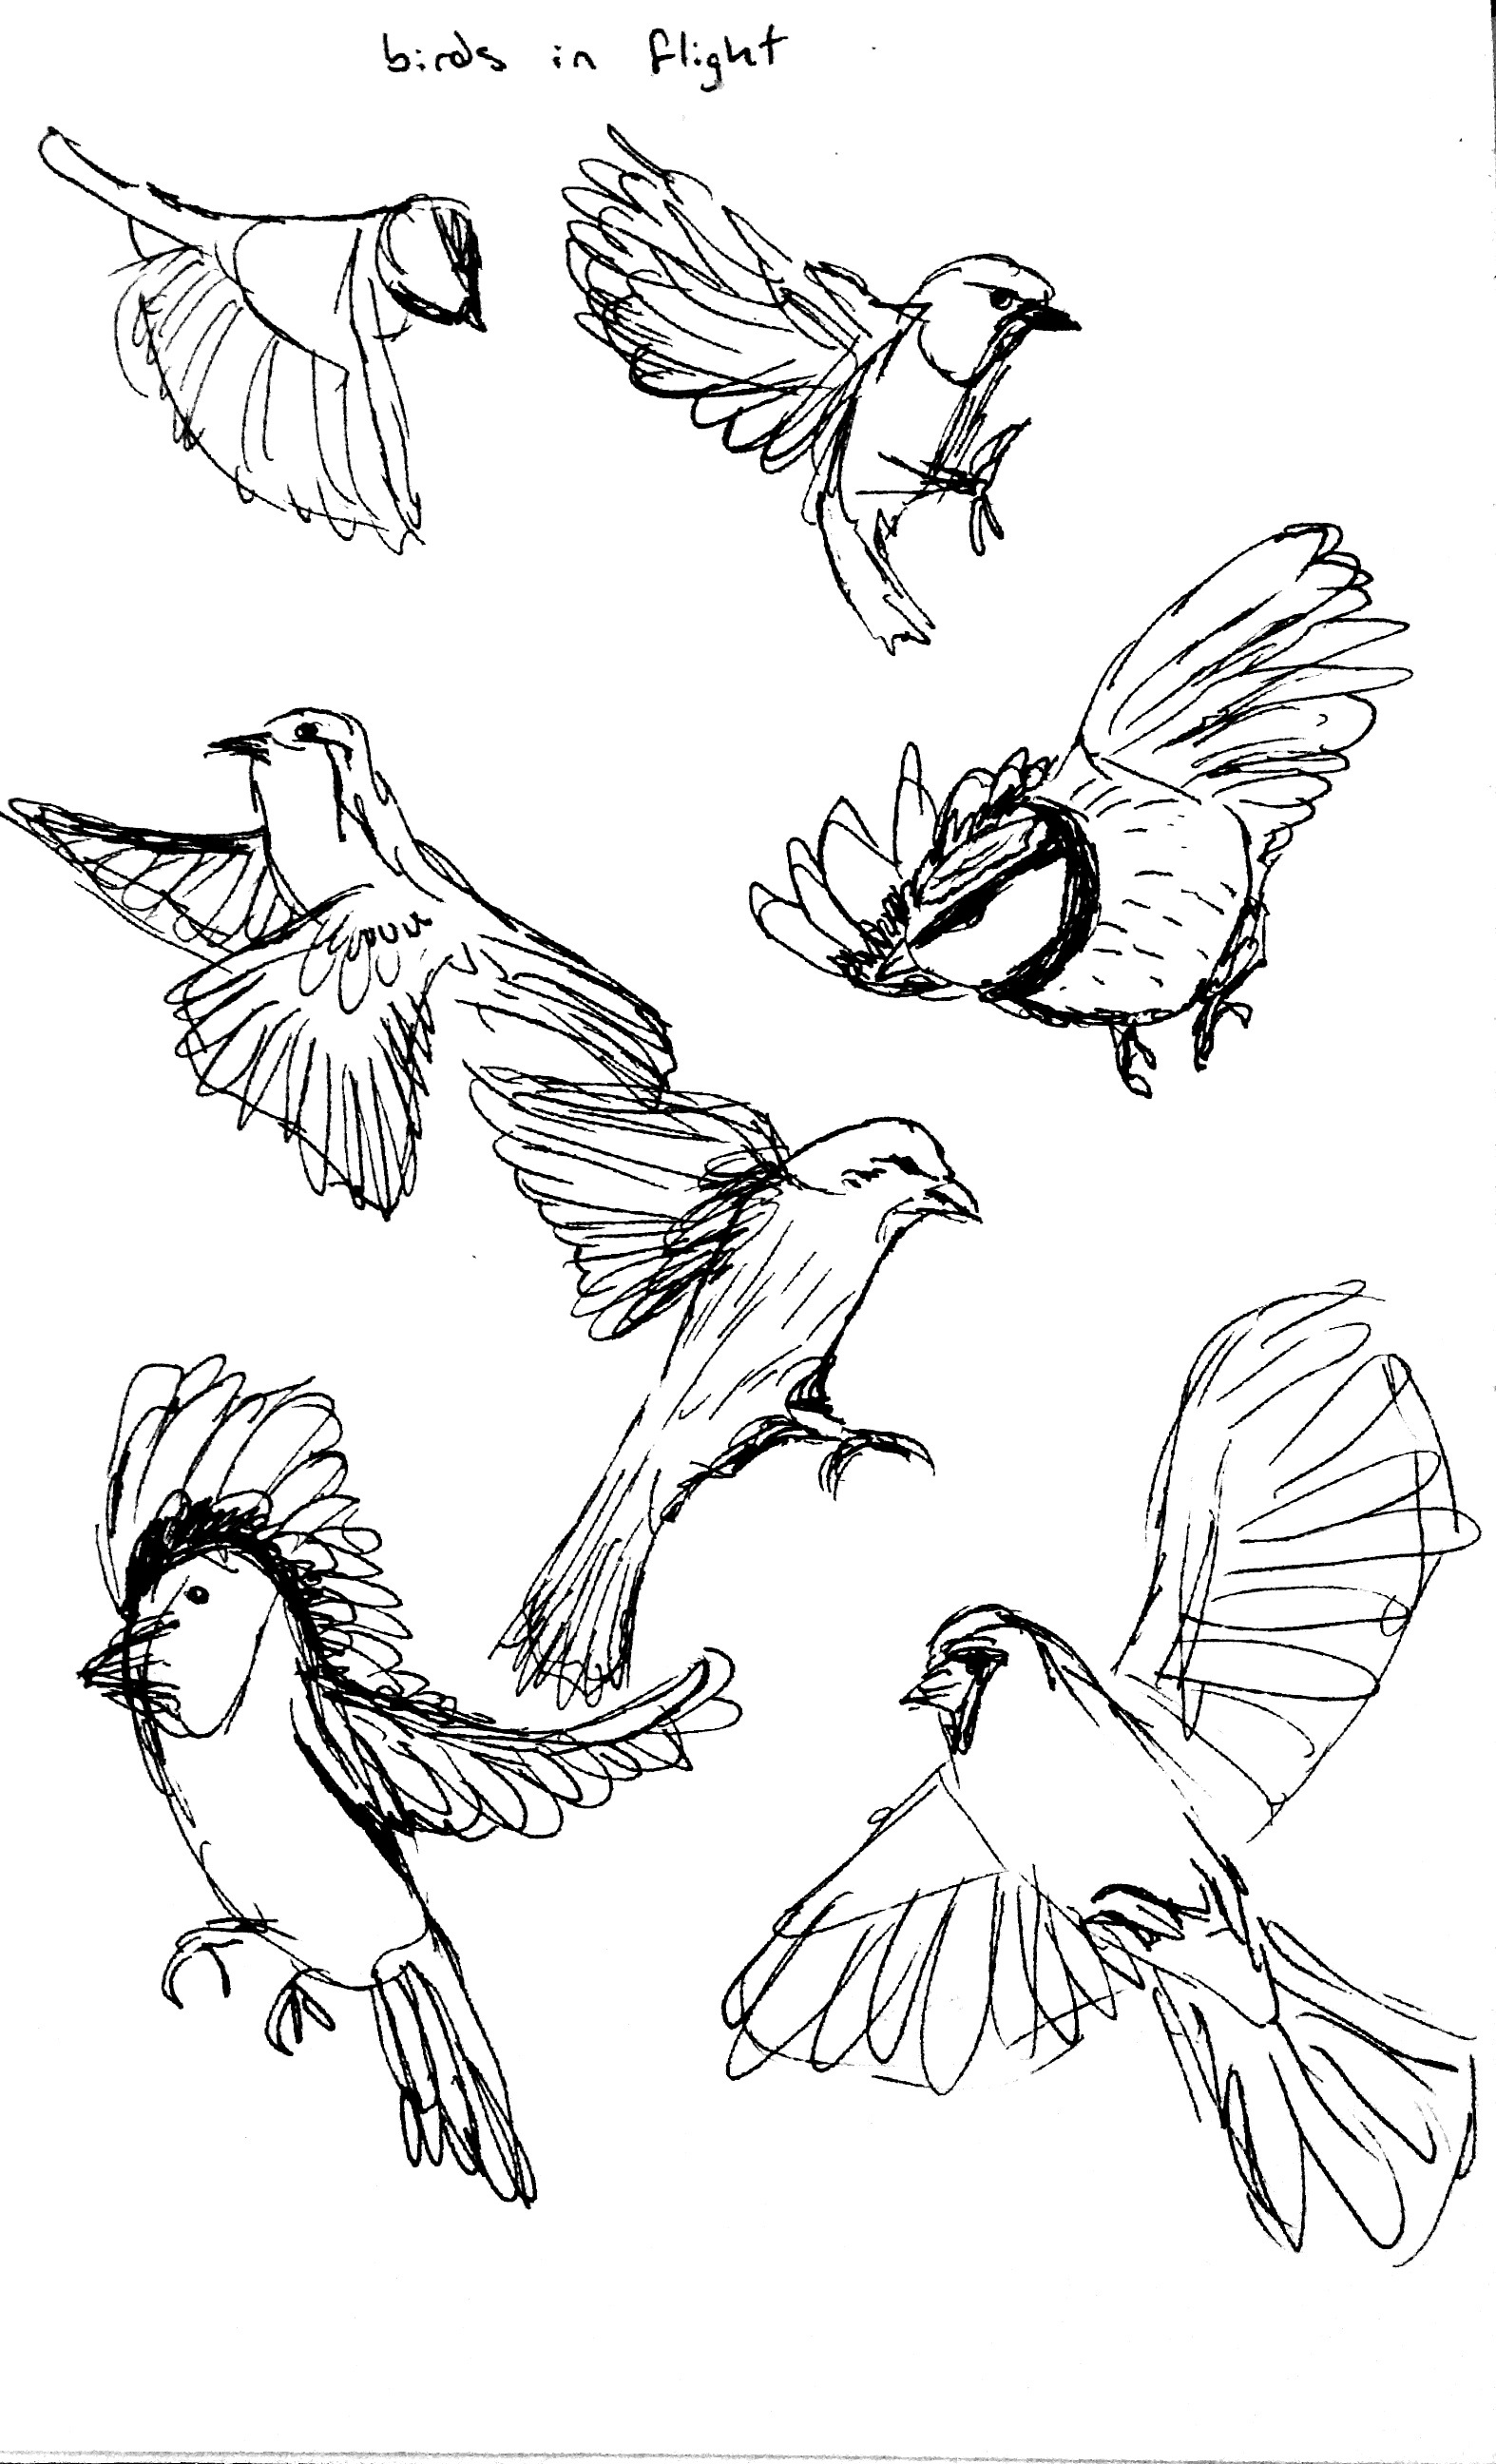 Flying Bird Drawing - Cliparts.co